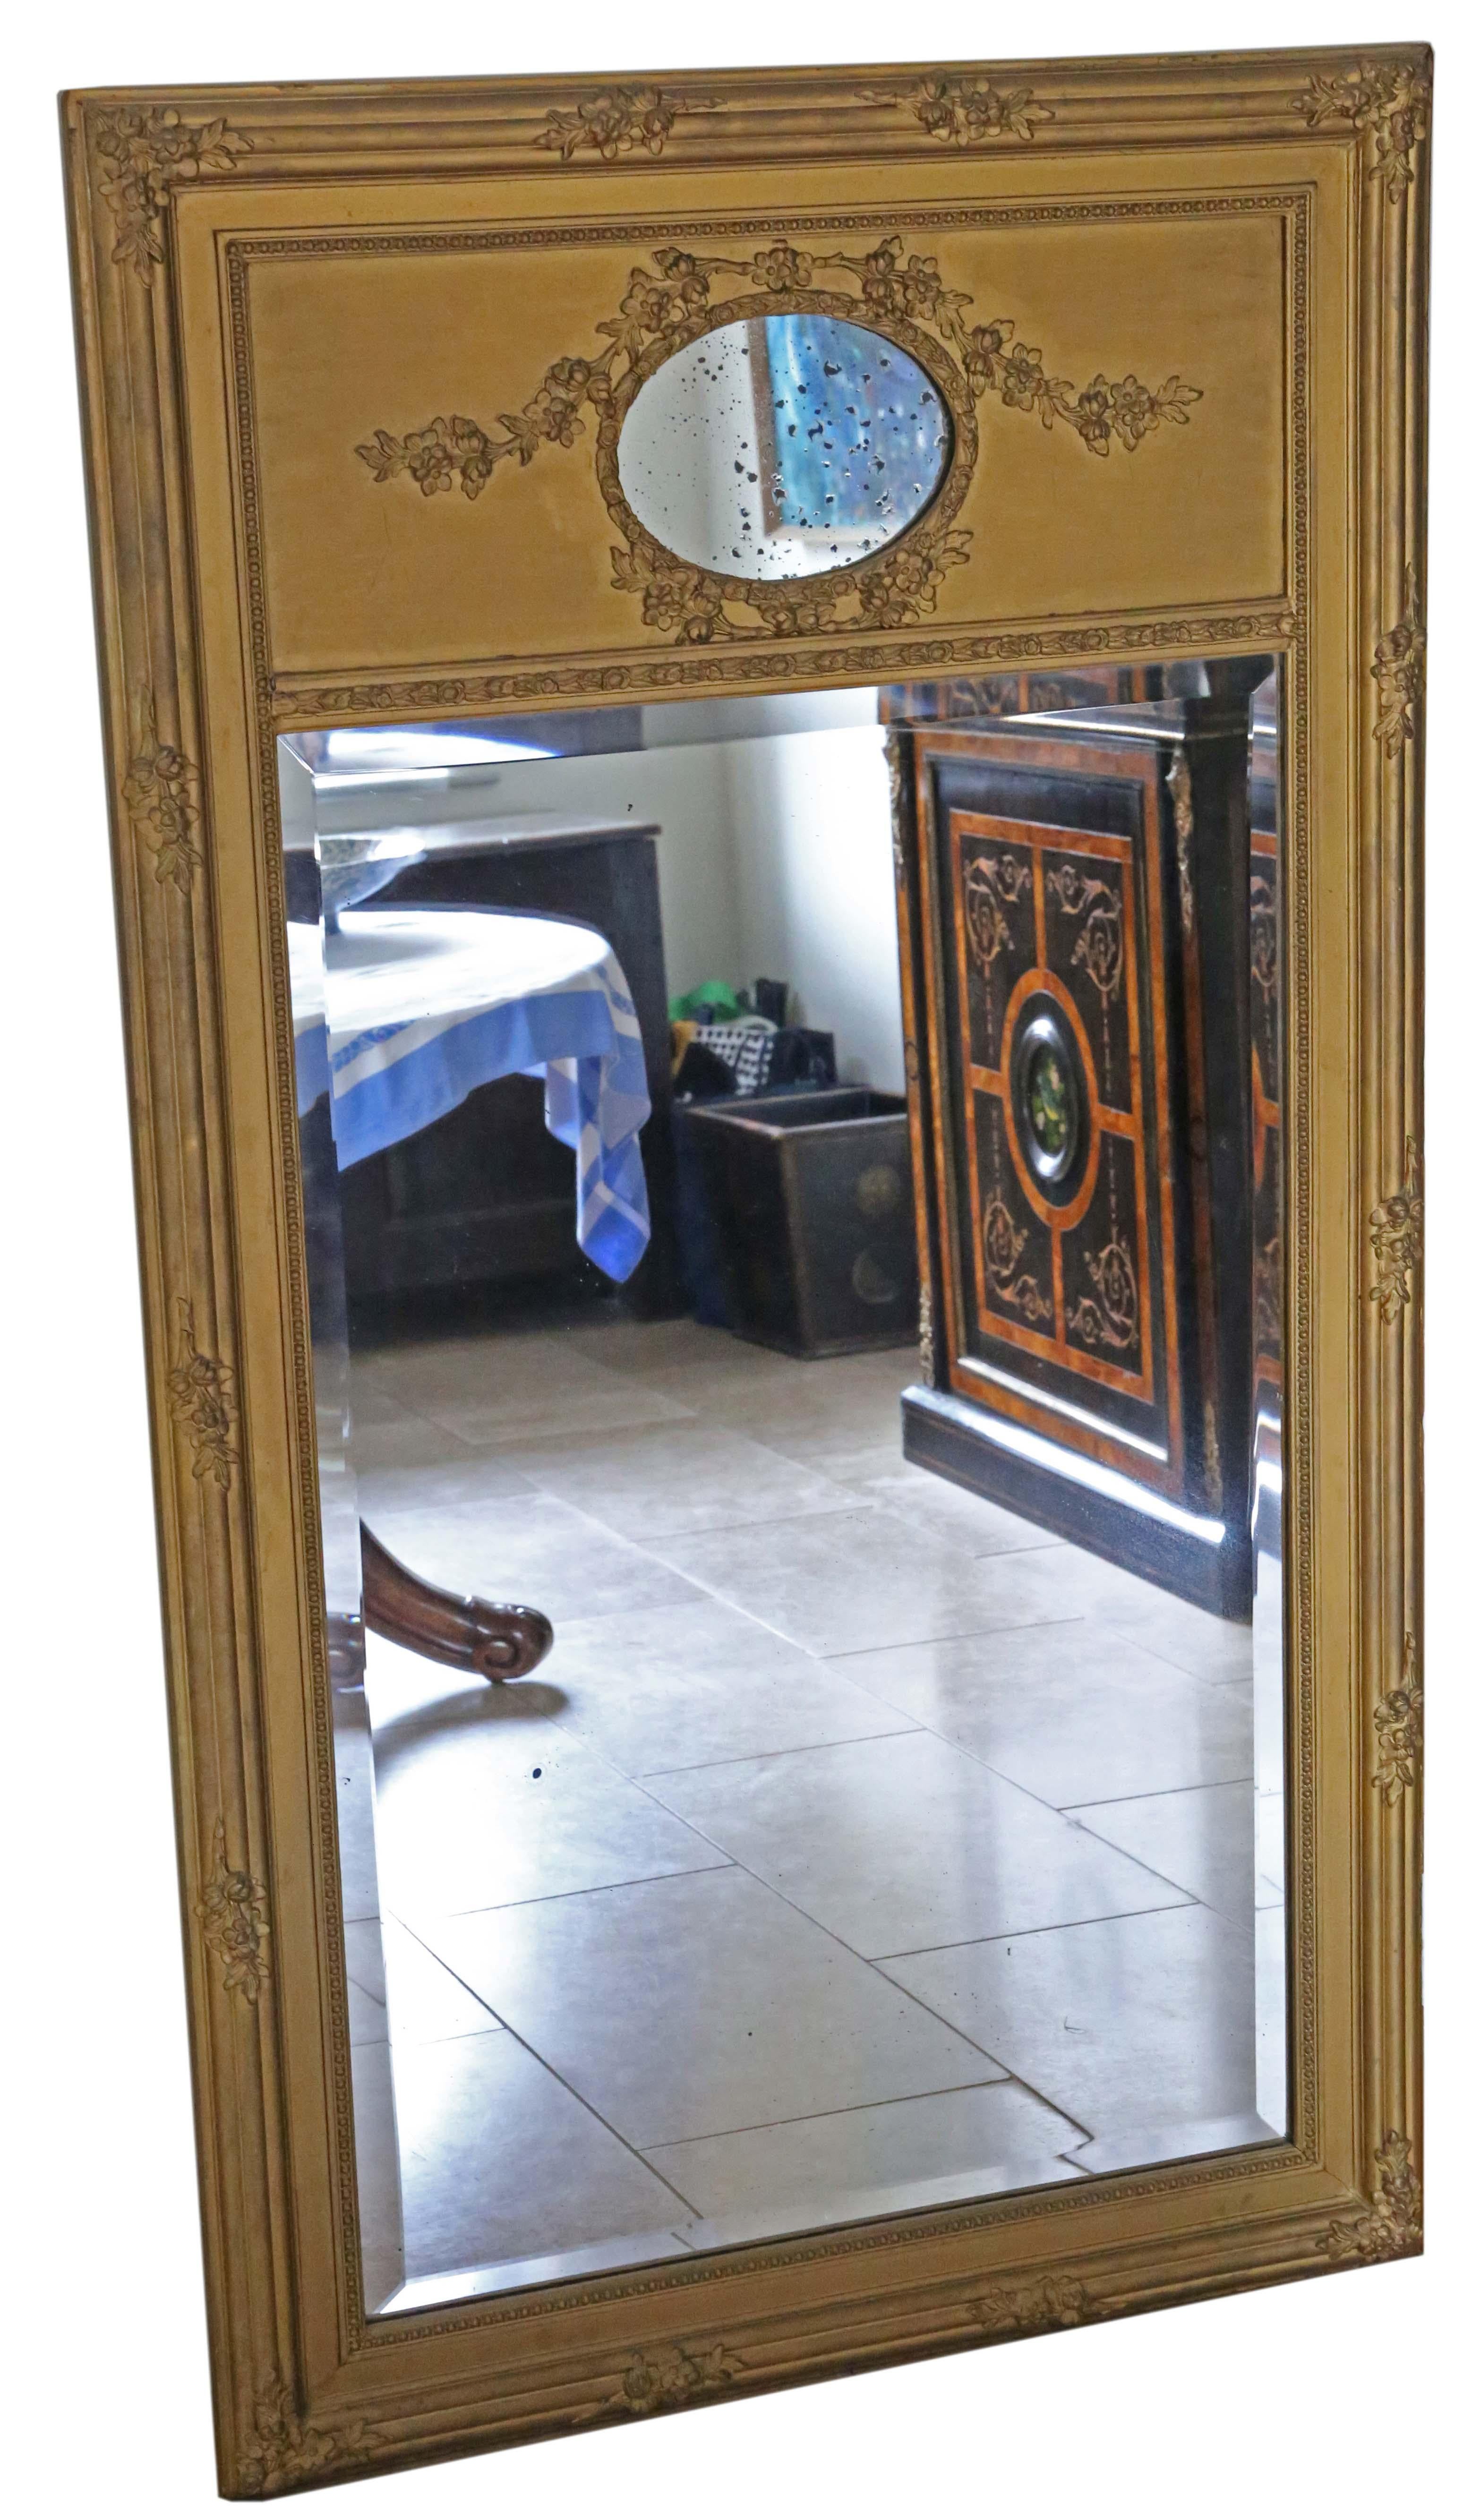 Antique circa 1900 large quality gilt floor wall overmantle trumeau mirror.

No loose joints or woodworm.

The main original bevel edge mirrored glass has light oxidation, some shadowing and age related imperfections.

The oval original